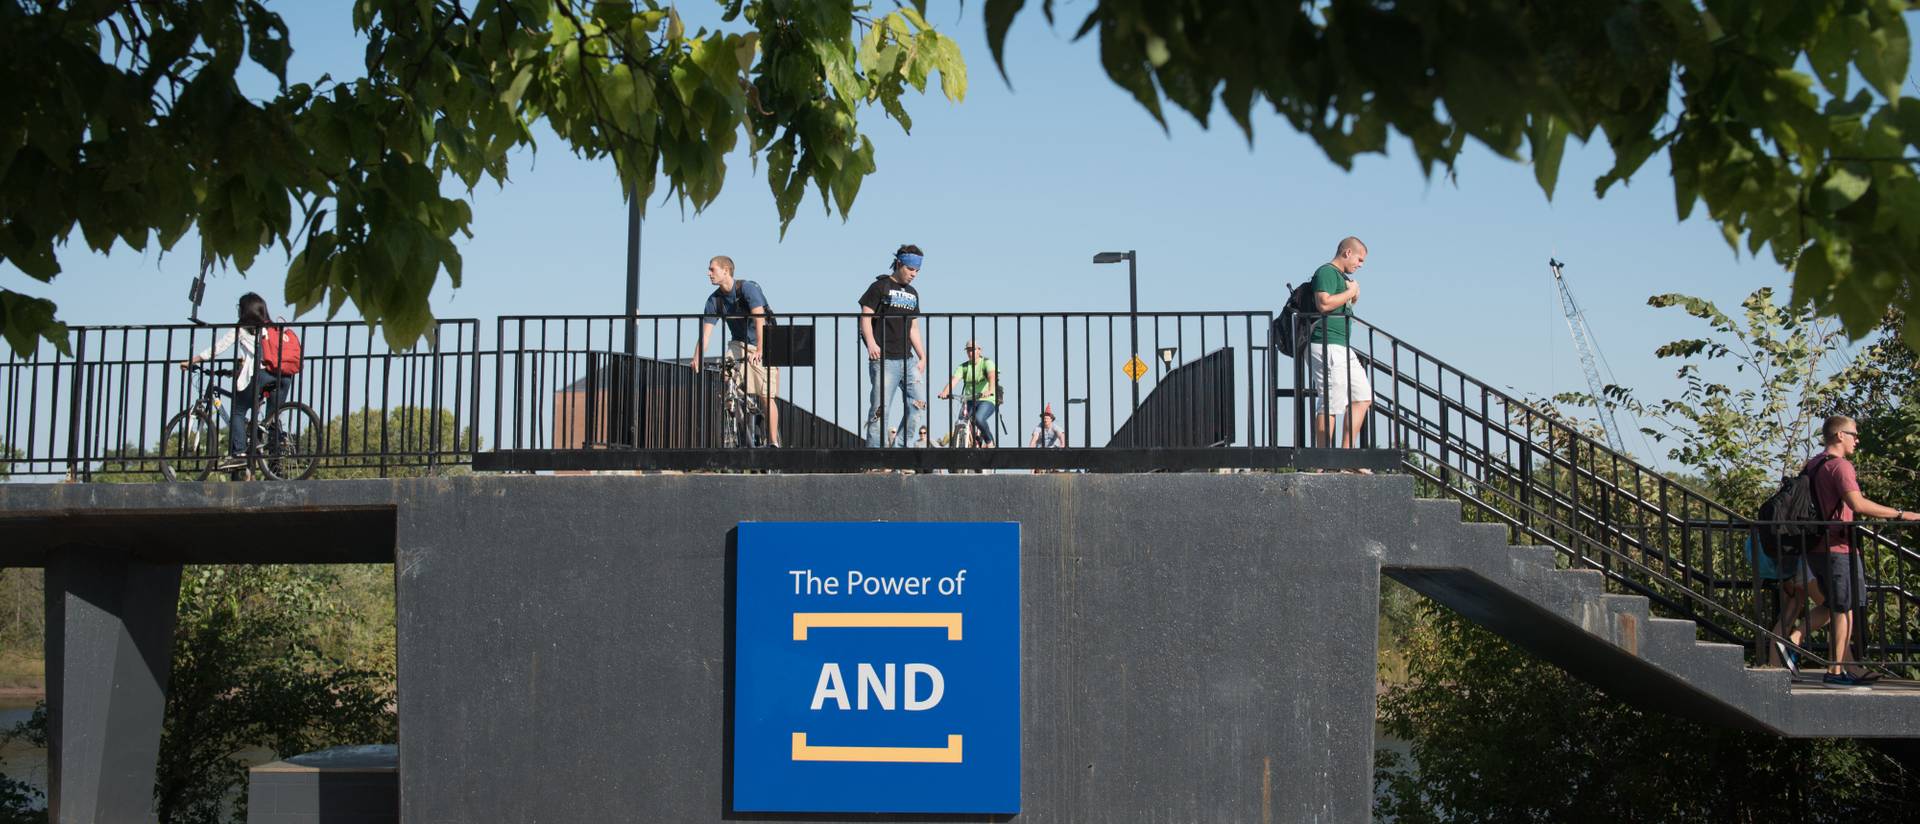 Students walk and bike on the campus bridge, with "The Power of AND" logo displayed at the end of the bridge.